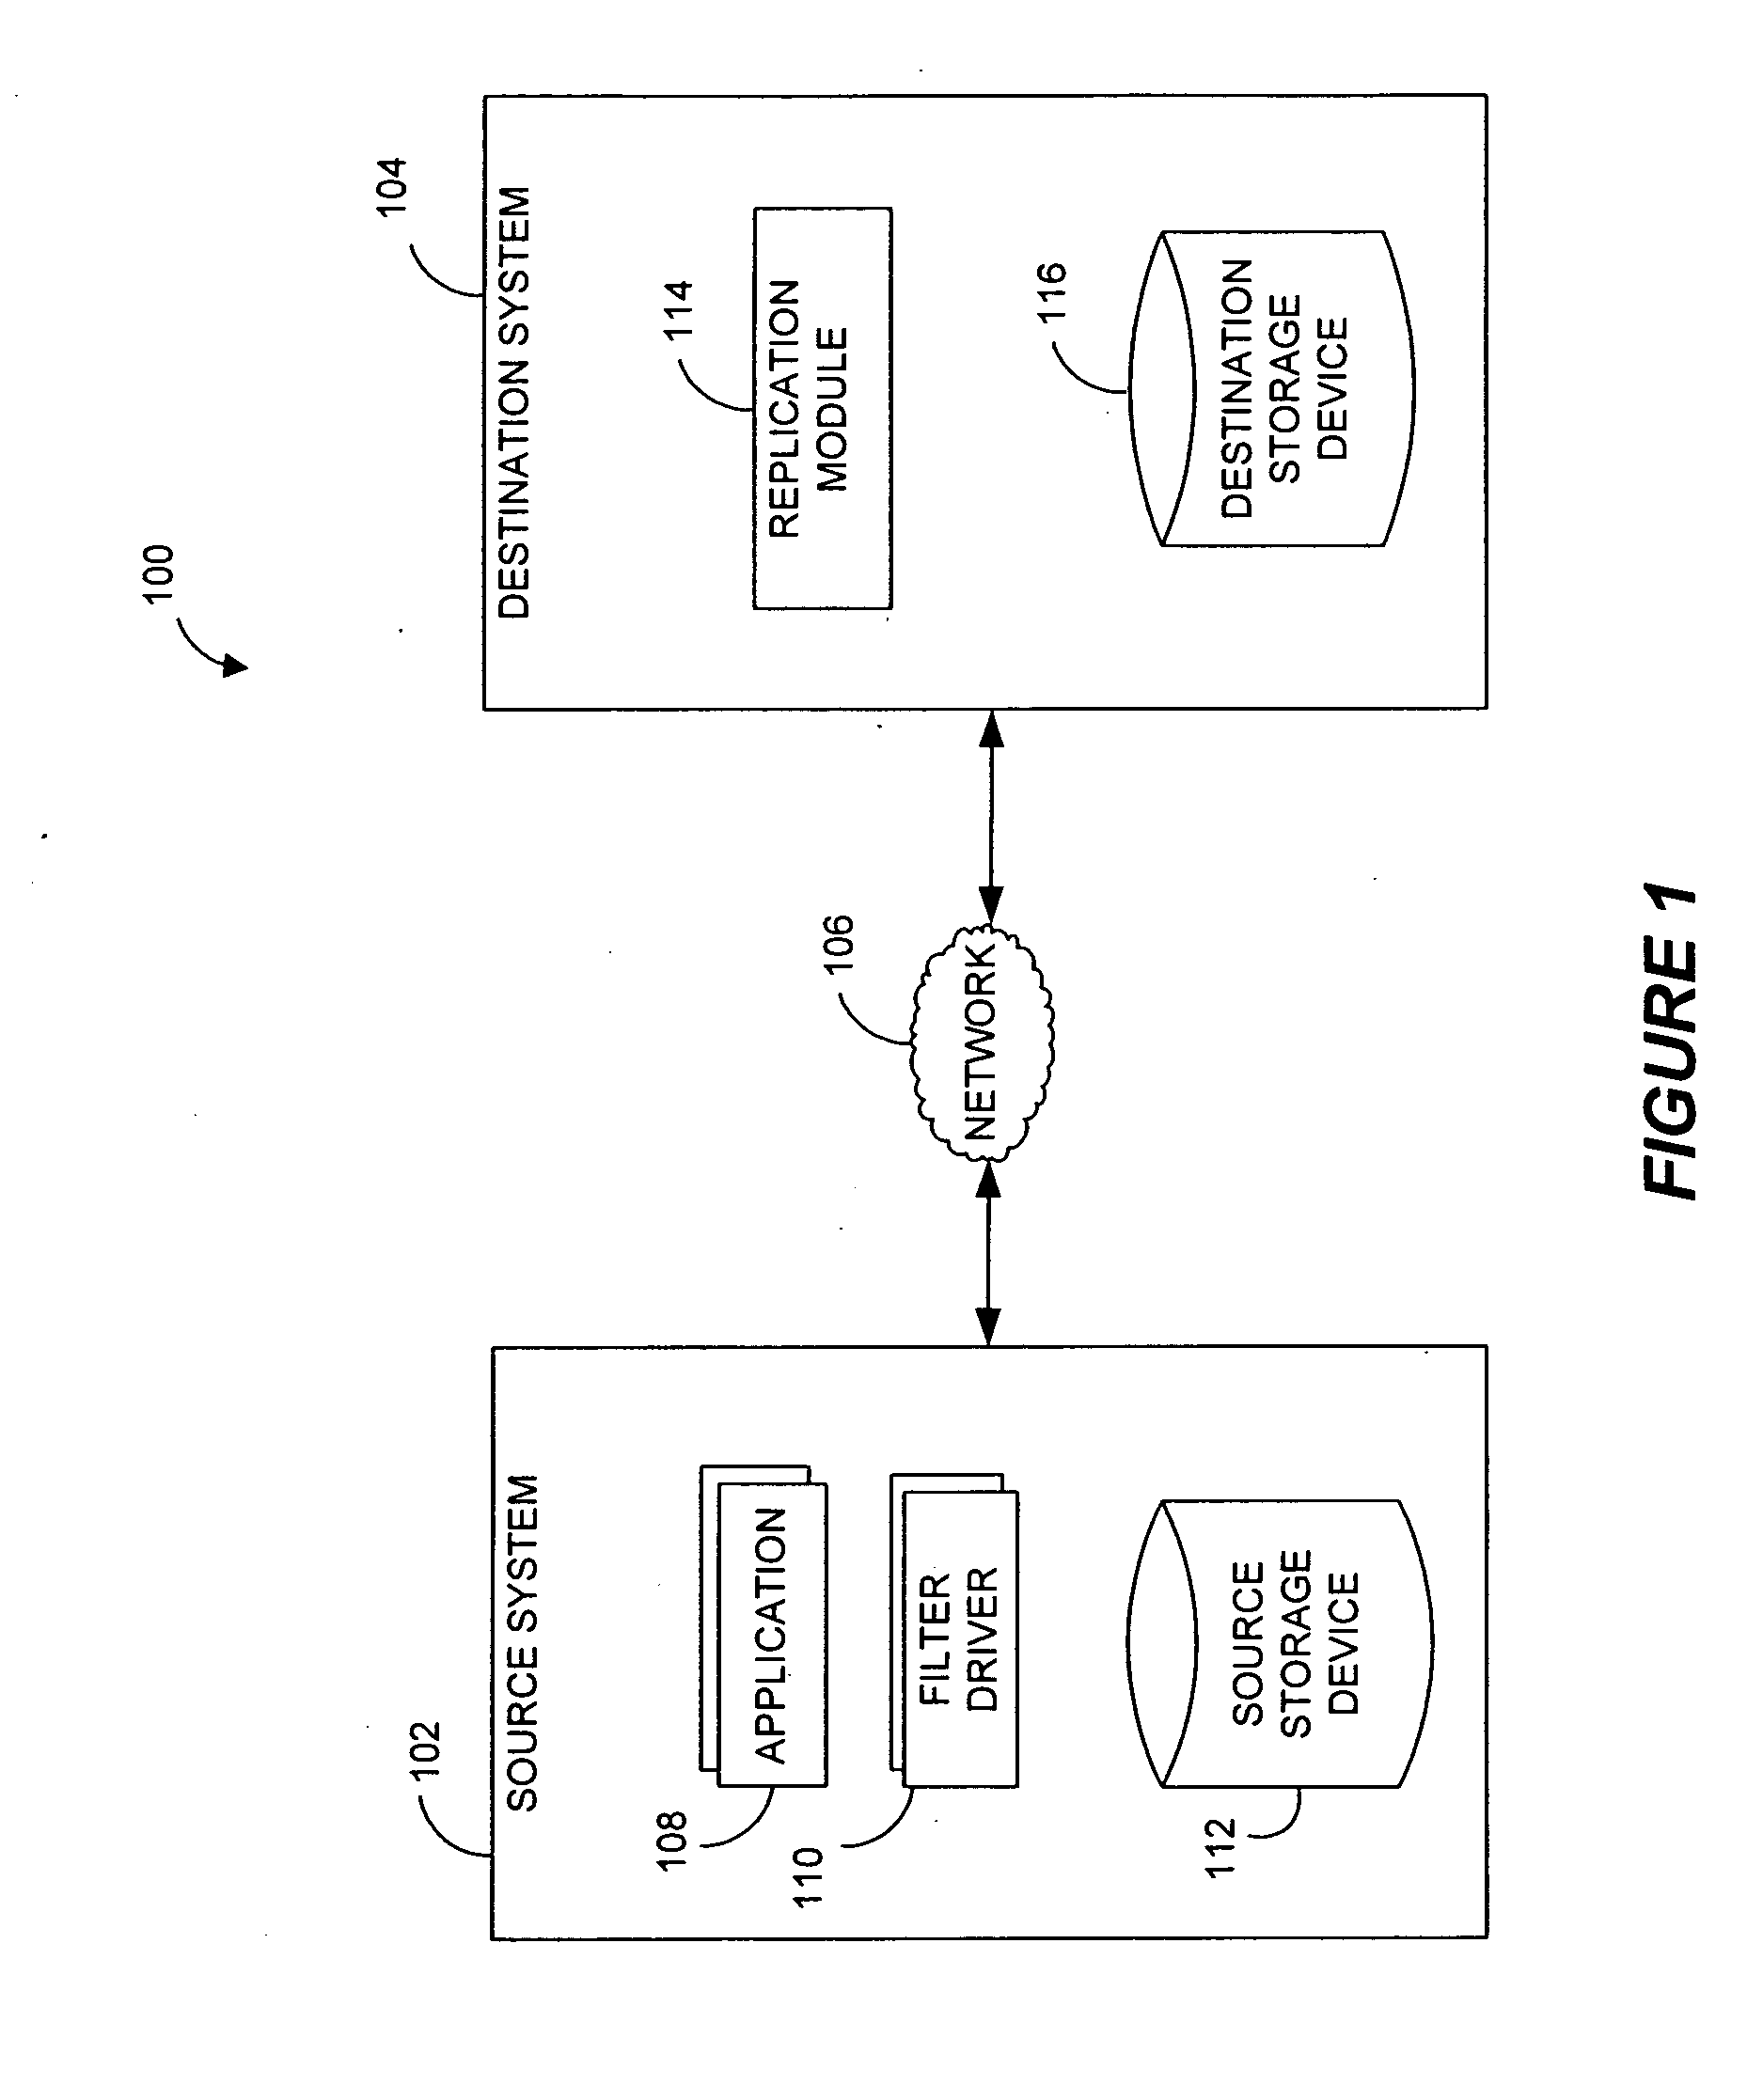 Systems and methods for monitoring application data in a data replication system